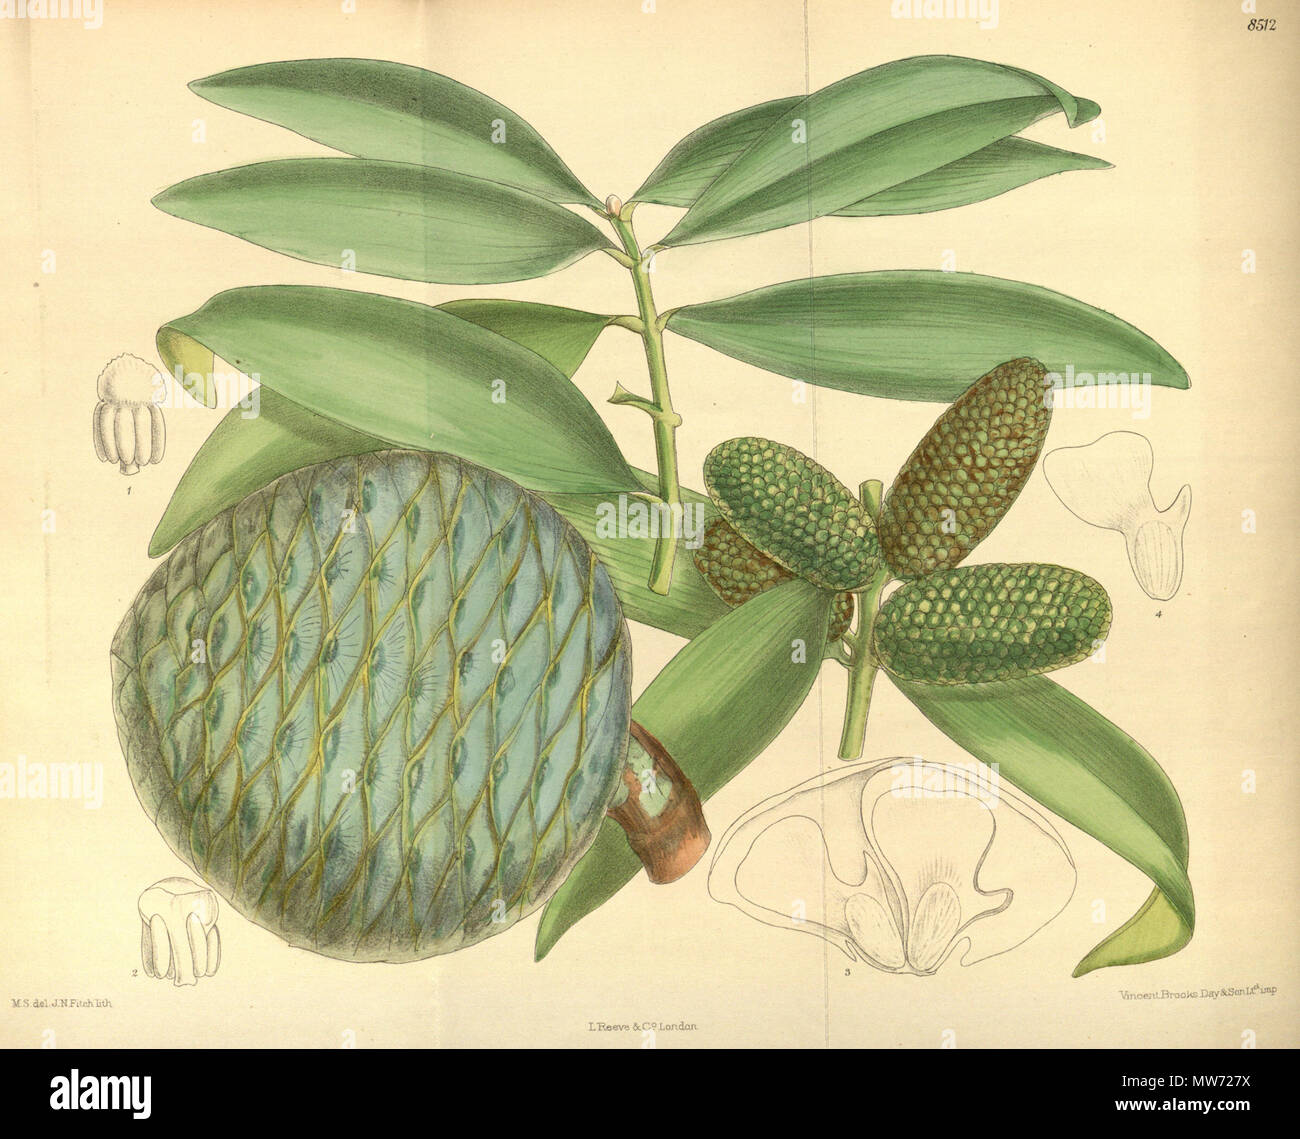 . Agathis vitiensis (= Agathis macrophylla), Araucariaceae . 1913. M.S. del, J.N.Fitch, lith. 29 Agathis vitiensis 139-8512 Stock Photo